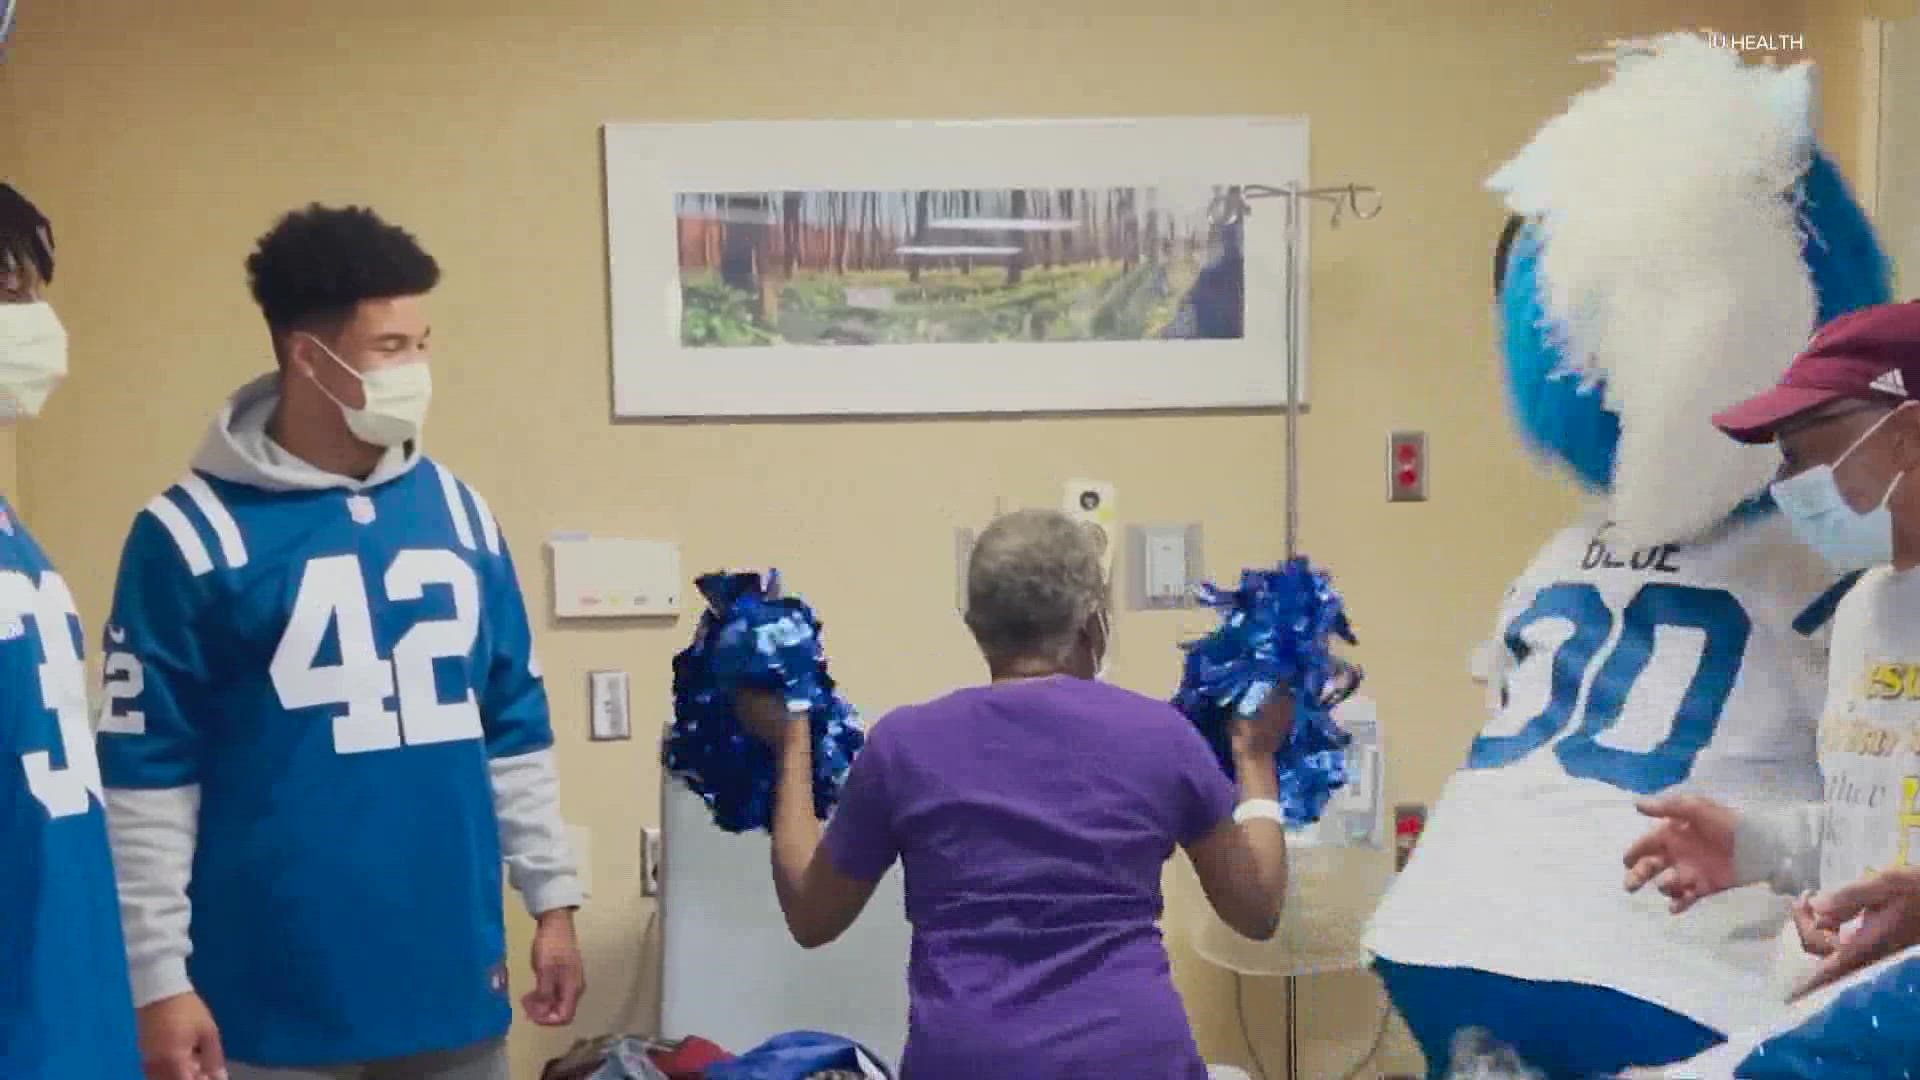 Players, cheerleaders and Blue went to IU Health's Simon Cancer Center to give some cheer to patients, doctors and nurses.